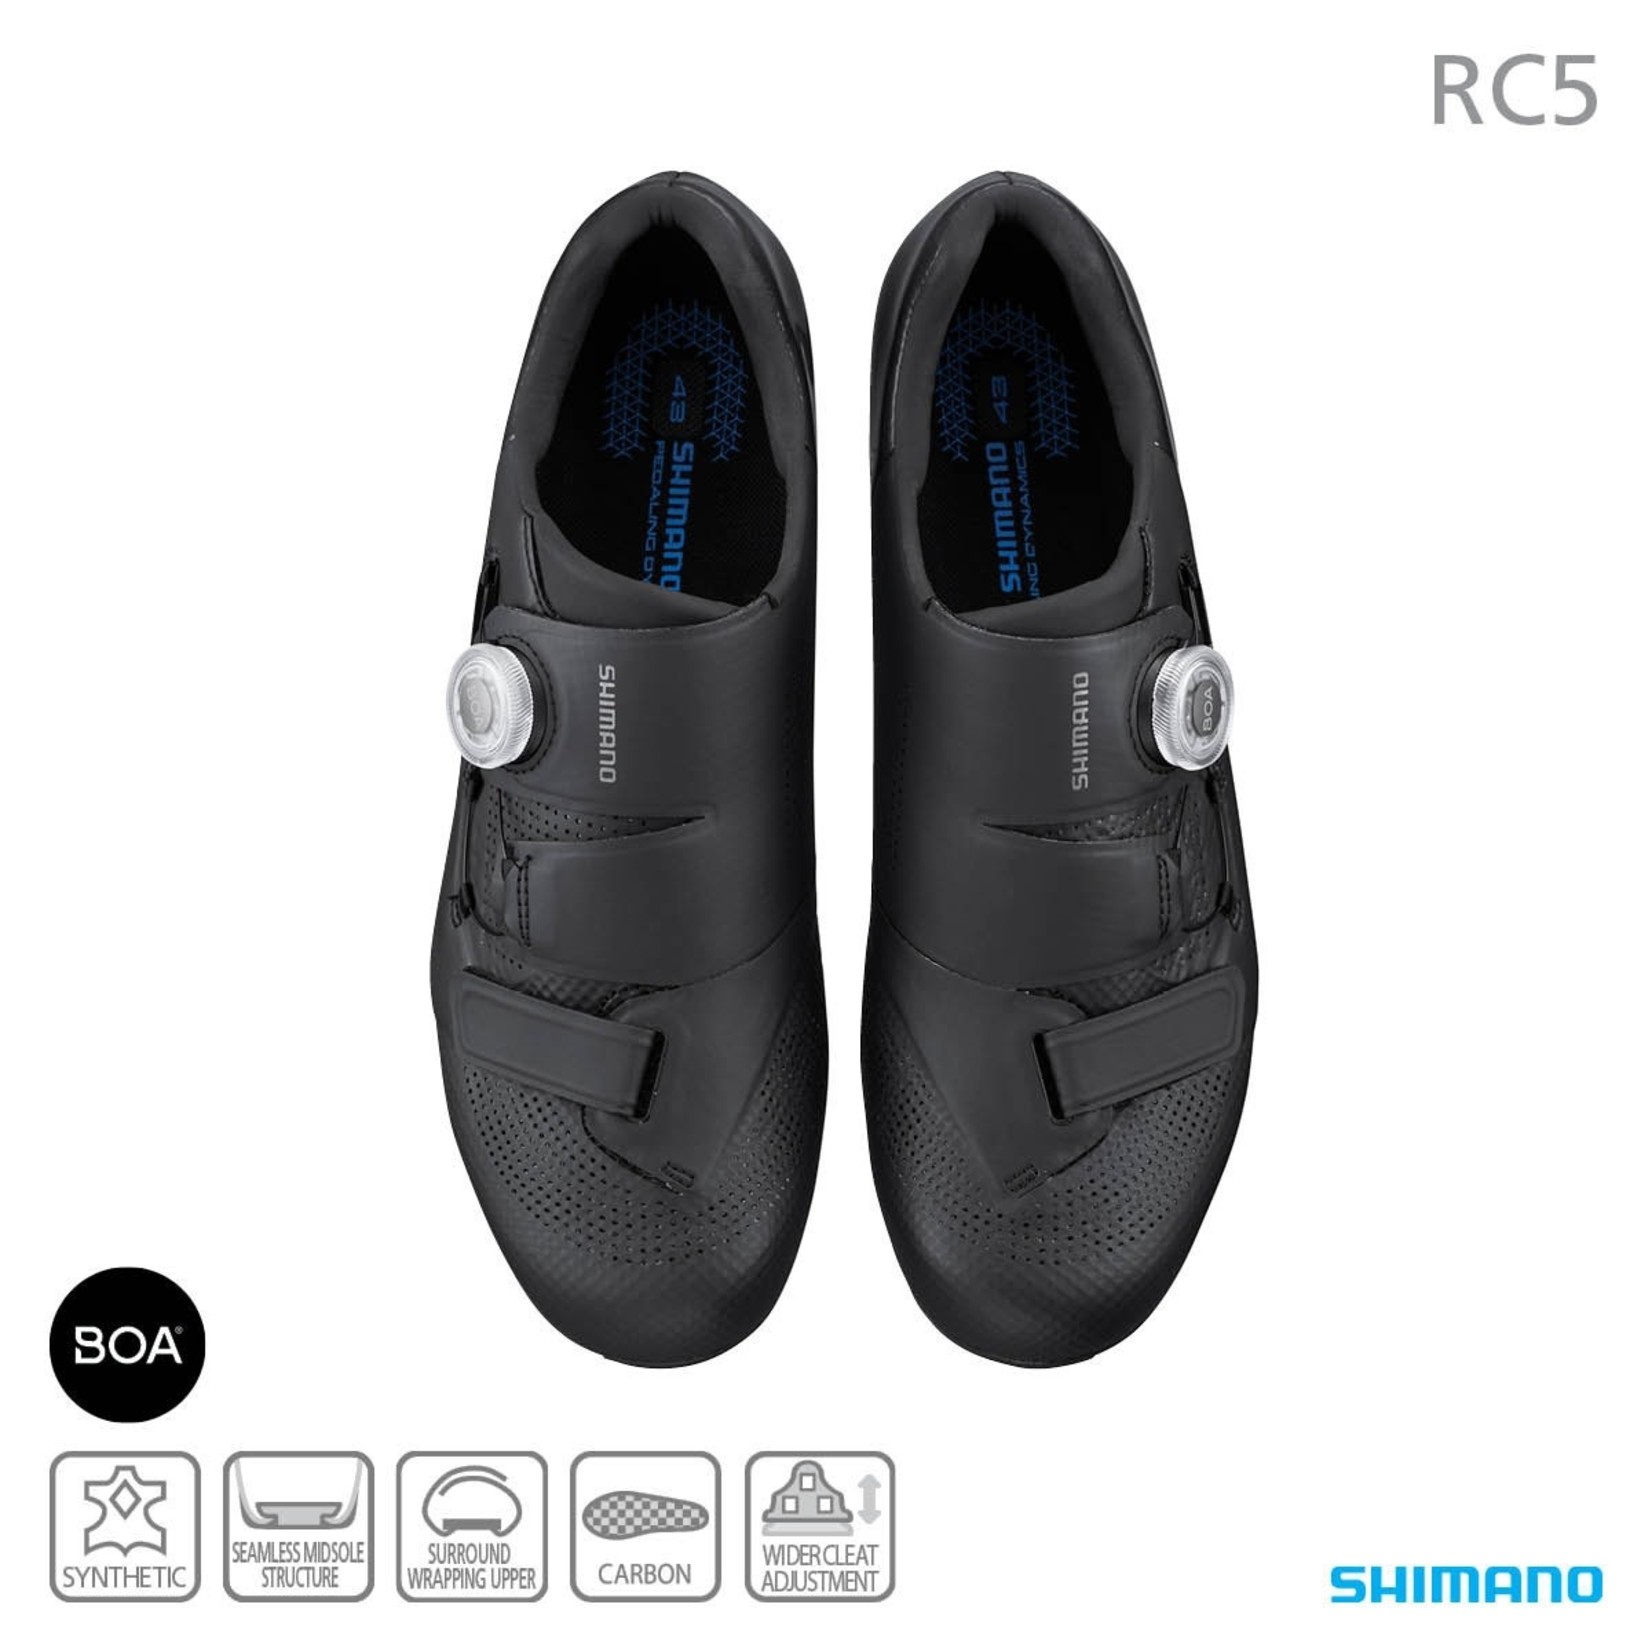 Shimano Shimano SH-RC502 Road Bike Cycling Shoes - Black Synthetic Leather Material